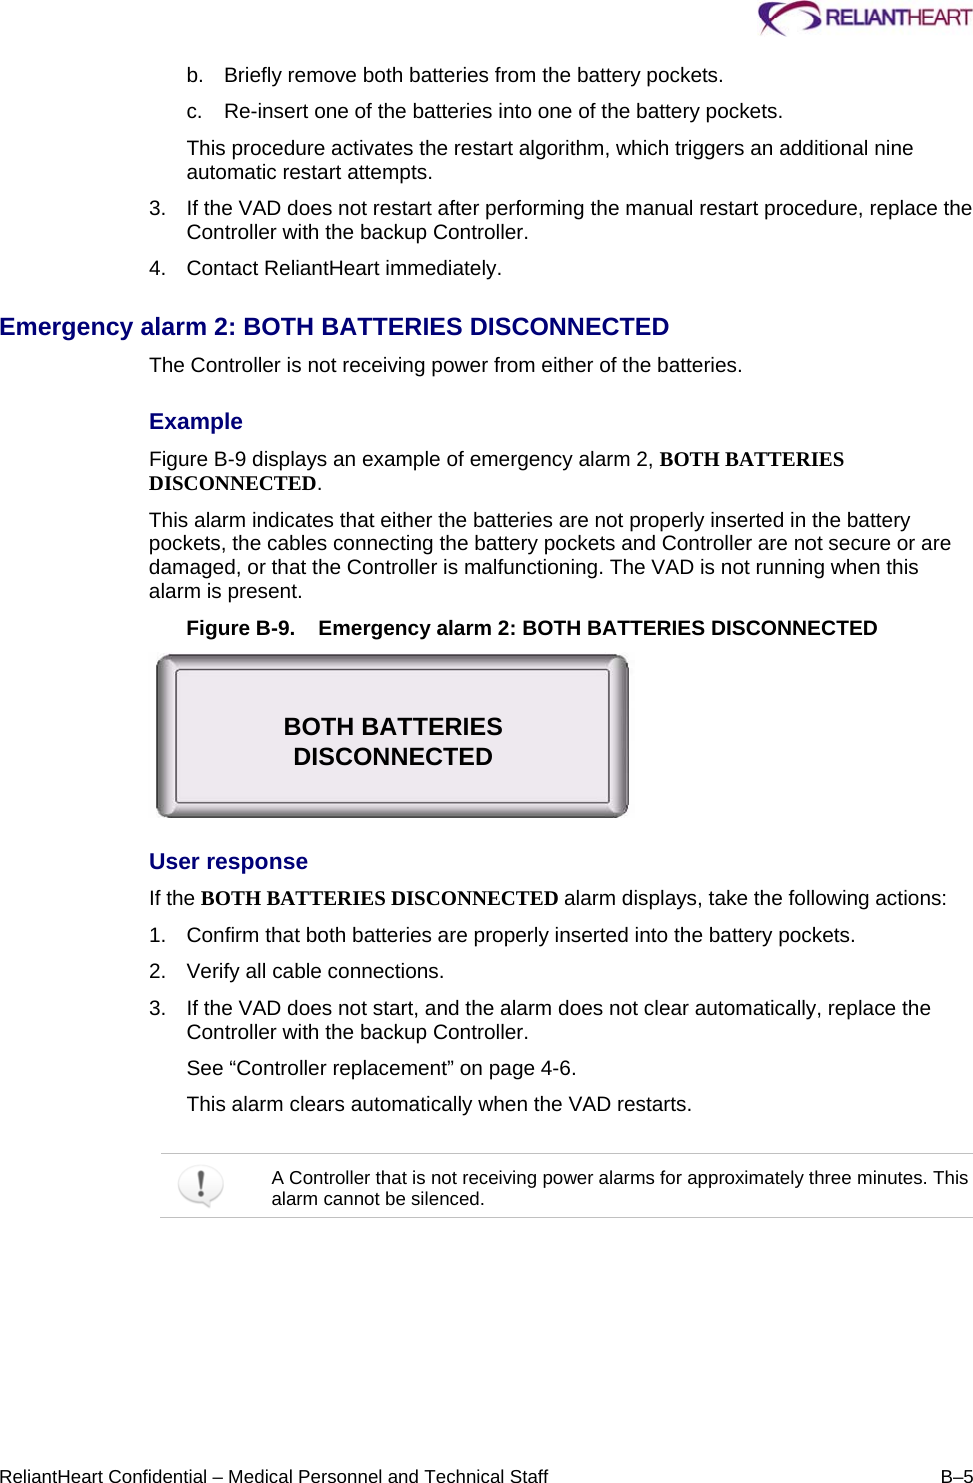     ReliantHeart Confidential – Medical Personnel and Technical Staff  B–5 b.  Briefly remove both batteries from the battery pockets.  c.  Re-insert one of the batteries into one of the battery pockets.  This procedure activates the restart algorithm, which triggers an additional nine automatic restart attempts.  3.  If the VAD does not restart after performing the manual restart procedure, replace the Controller with the backup Controller.  4.  Contact ReliantHeart immediately.  Emergency alarm 2: BOTH BATTERIES DISCONNECTED  The Controller is not receiving power from either of the batteries.  Example  Figure B-9 displays an example of emergency alarm 2, BOTH BATTERIES DISCONNECTED.  This alarm indicates that either the batteries are not properly inserted in the battery pockets, the cables connecting the battery pockets and Controller are not secure or are damaged, or that the Controller is malfunctioning. The VAD is not running when this alarm is present.  Figure B-9.  Emergency alarm 2: BOTH BATTERIES DISCONNECTED  User response  If the BOTH BATTERIES DISCONNECTED alarm displays, take the following actions:  1.  Confirm that both batteries are properly inserted into the battery pockets.  2.  Verify all cable connections.  3.  If the VAD does not start, and the alarm does not clear automatically, replace the Controller with the backup Controller.  See “Controller replacement” on page 4-6. This alarm clears automatically when the VAD restarts.    A Controller that is not receiving power alarms for approximately three minutes. This alarm cannot be silenced.  BOTH BATTERIES DISCONNECTED 